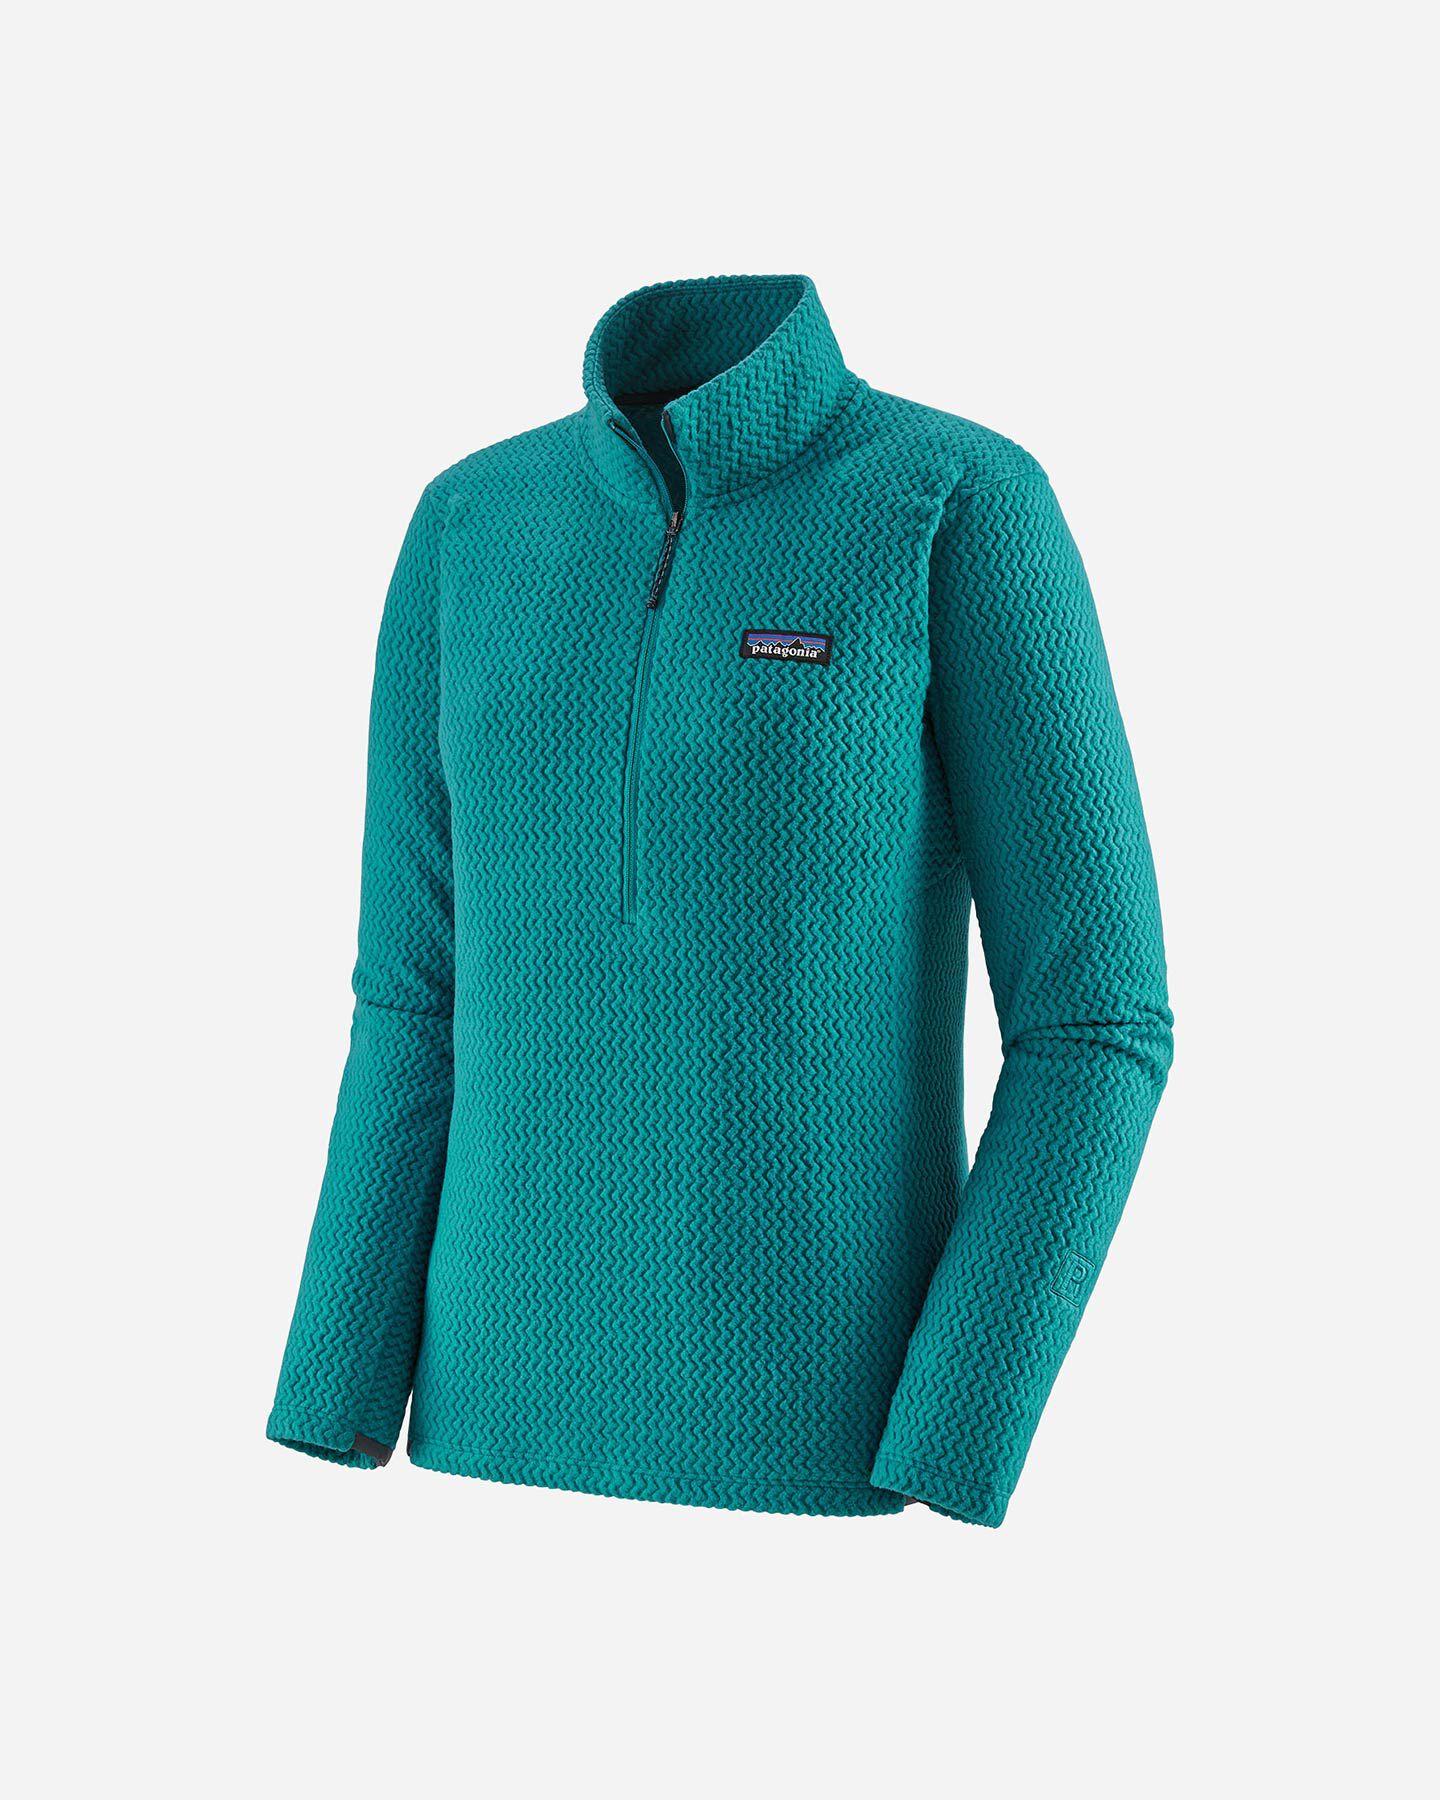  Pile PATAGONIA R1 AIR W S4097100|BRLG|XS scatto 0